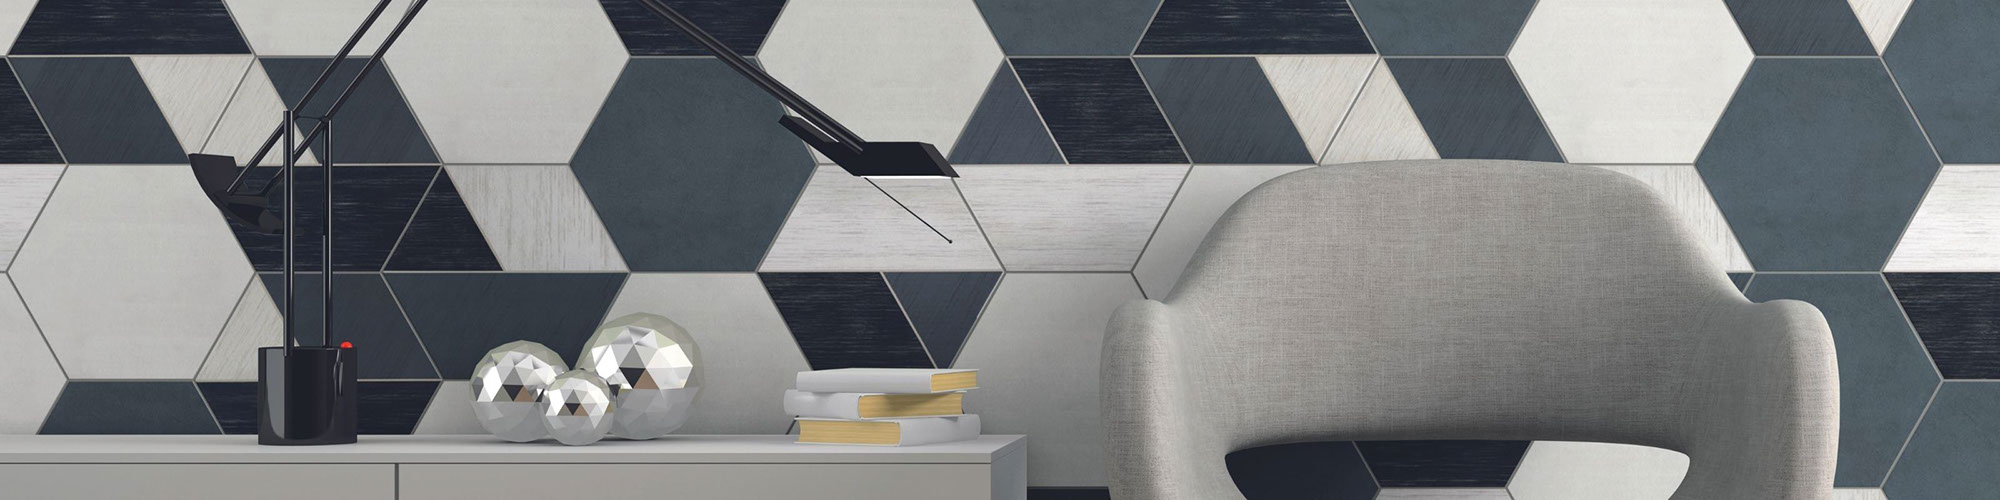 Eye-catching feature wall with white, gray and black hexagon tile, gray chair, gray credenza holding desk lamp and books, and gray floor tile.